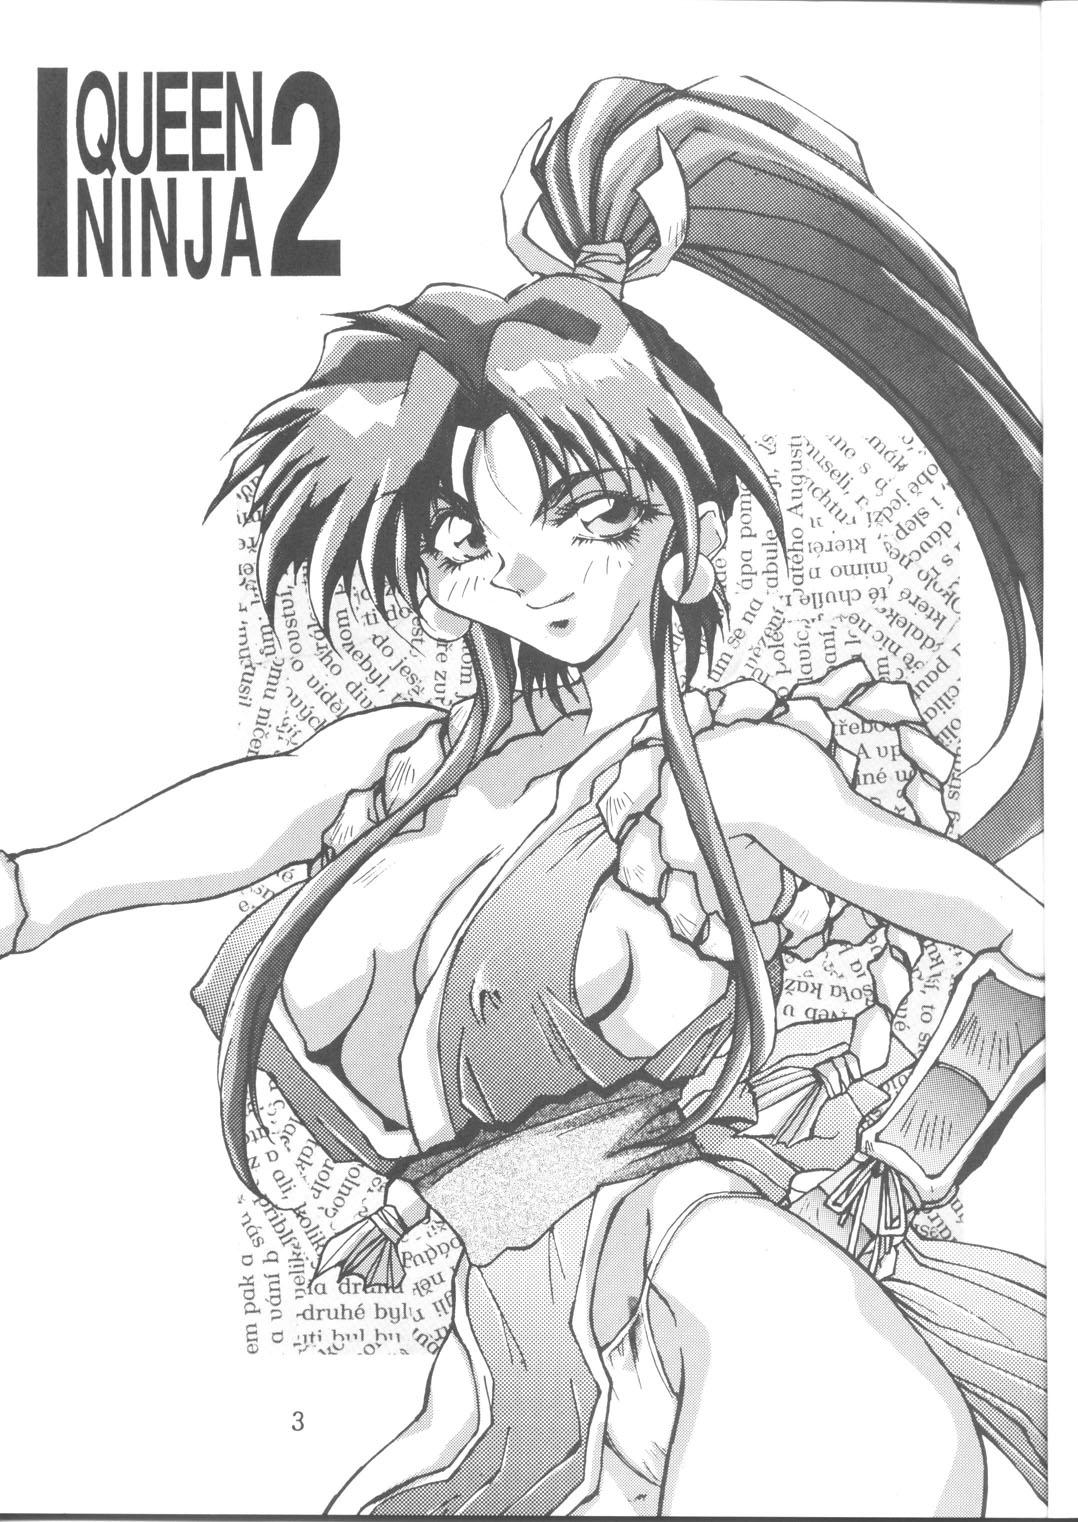 Topless Queen Ninja 2 - King of fighters Girl Fuck - Page 2